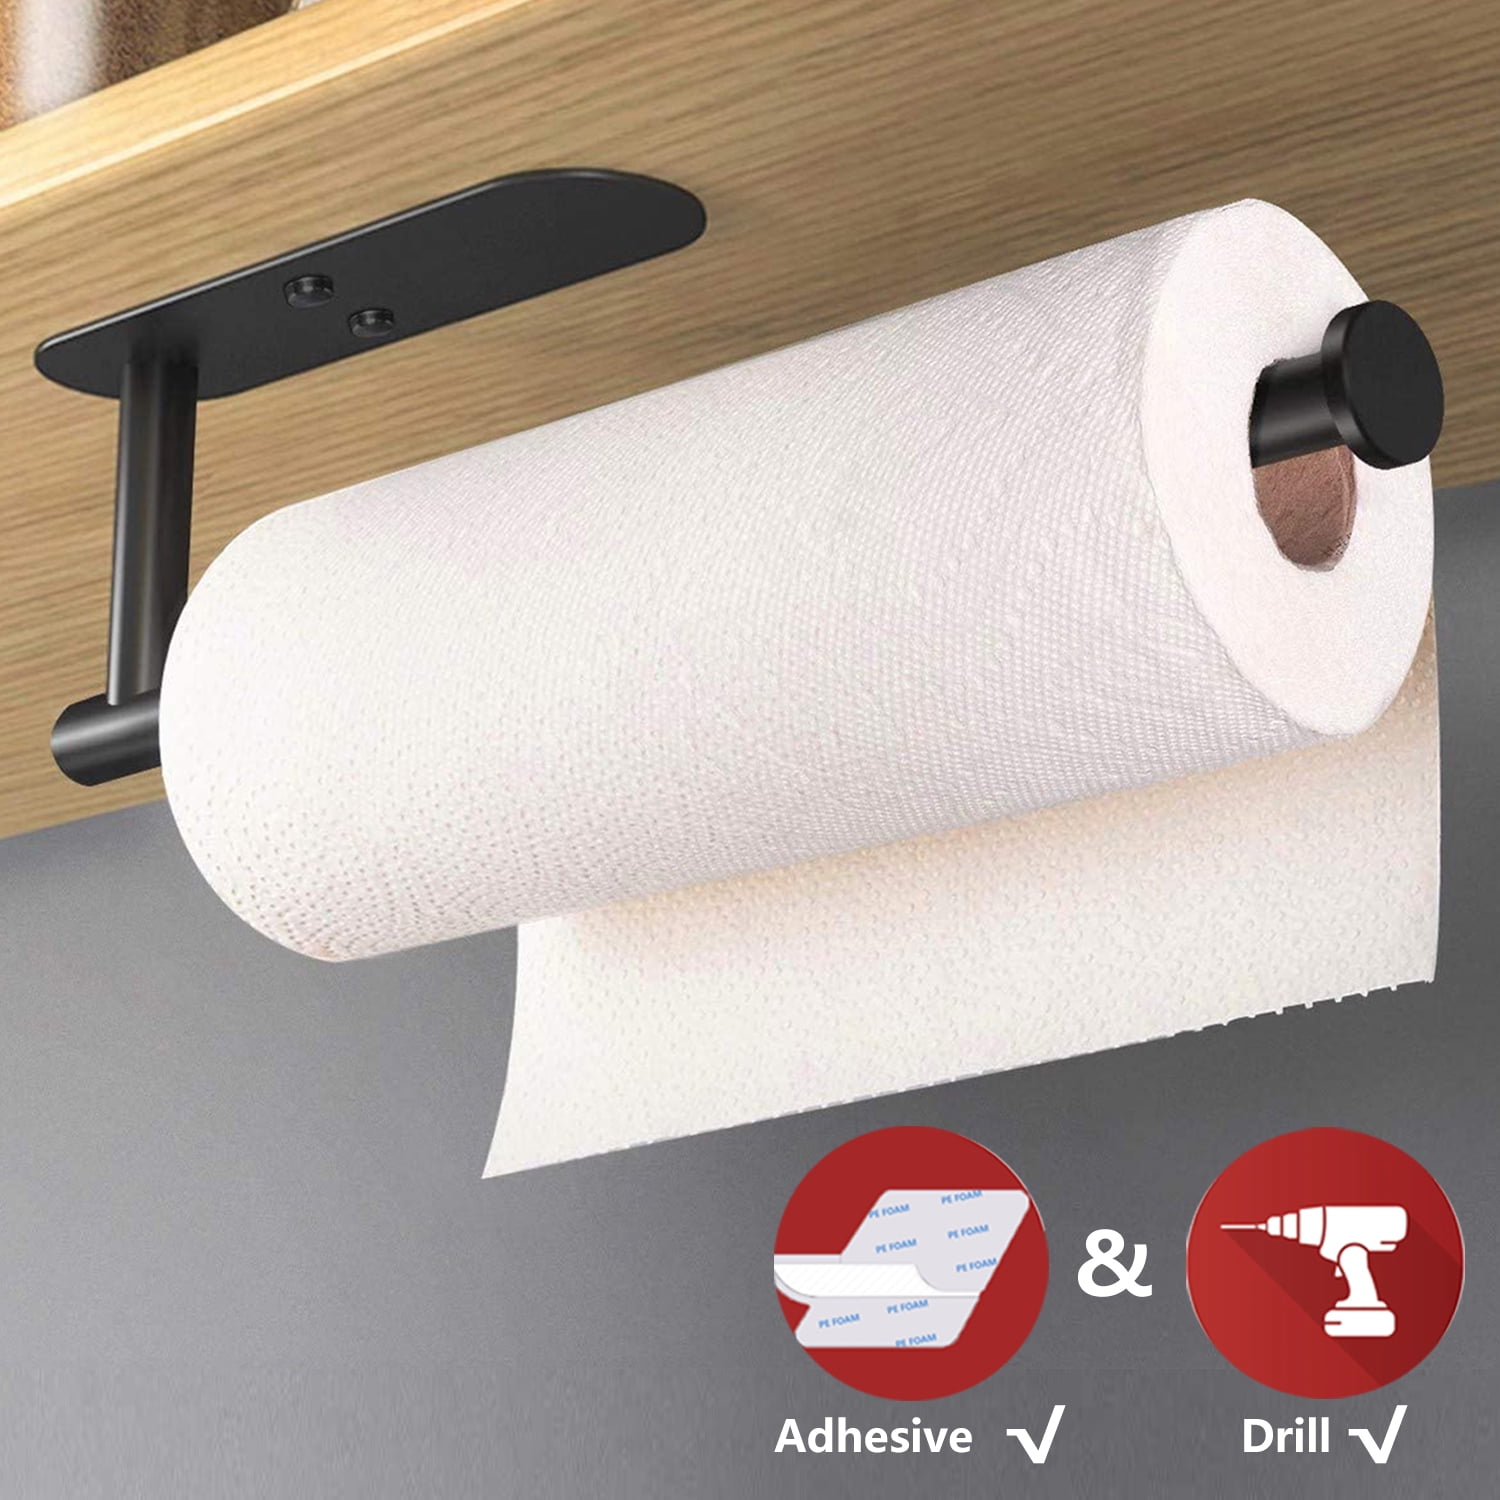 Fvviia Paper Towel Holder Under Kitchen Cabinet - Self Adhesive or Drilling  Paper Towel Holder, Wall Mount Stick on Wall with Screws, Vertically or